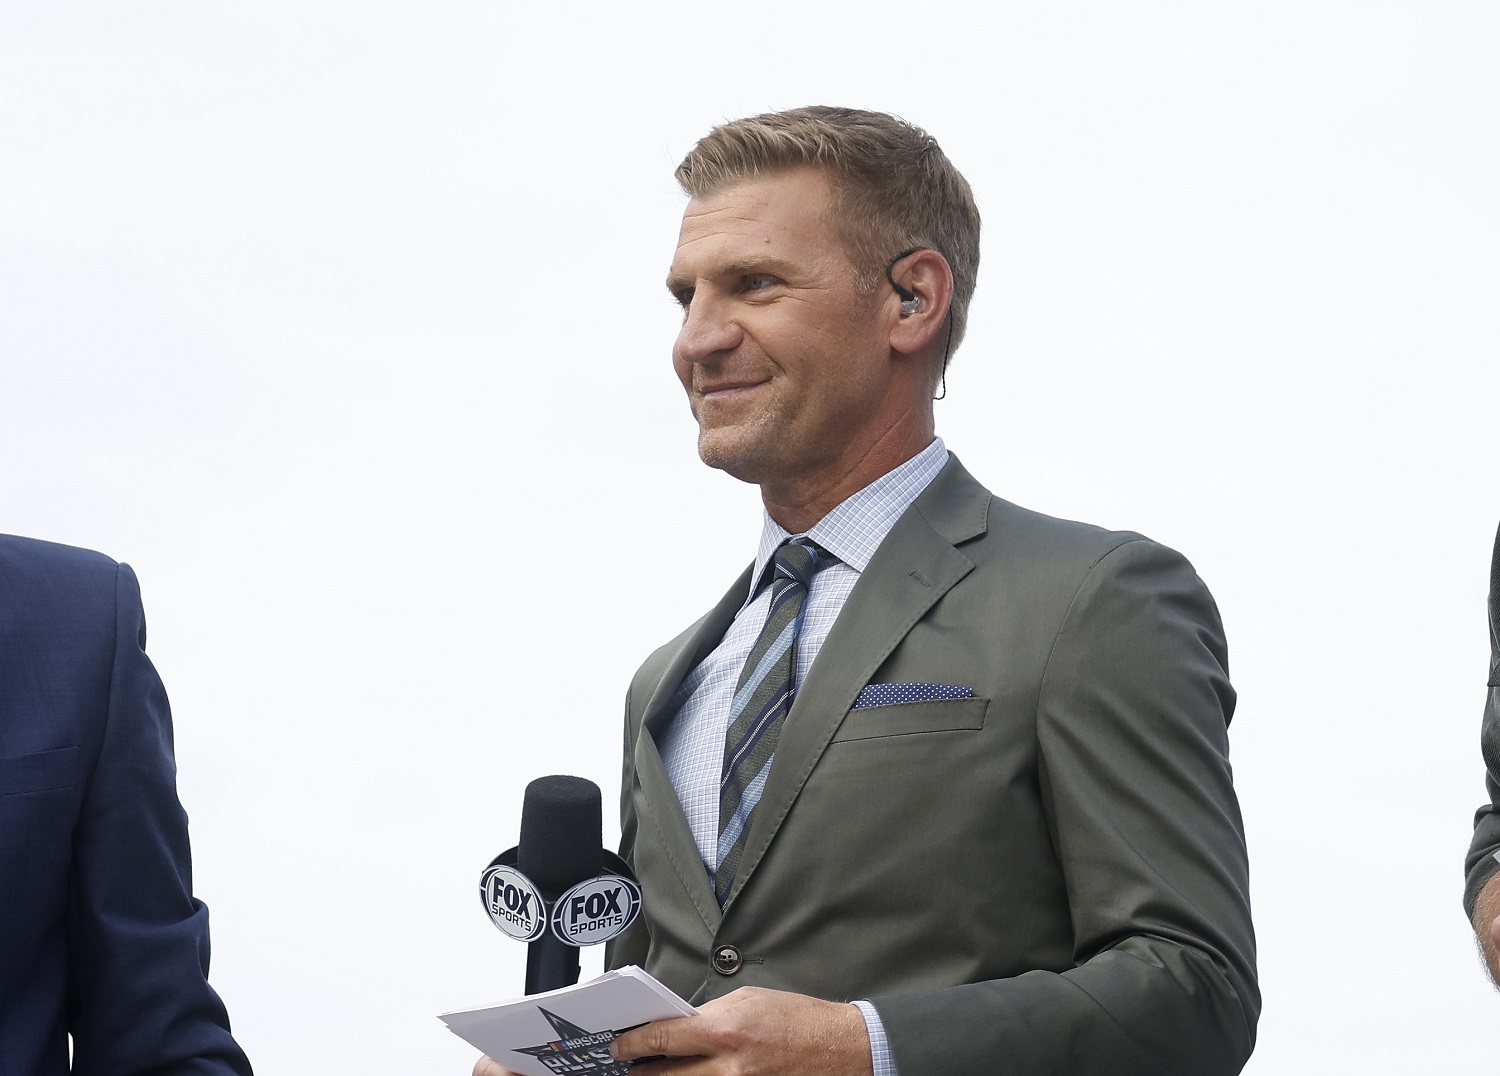 NASCAR Fox Sports analyst Clint Bowyer during ceremonies prior to the NASCAR Cup Series All-Star Race at Texas Motor Speedway on May 22, 2022.